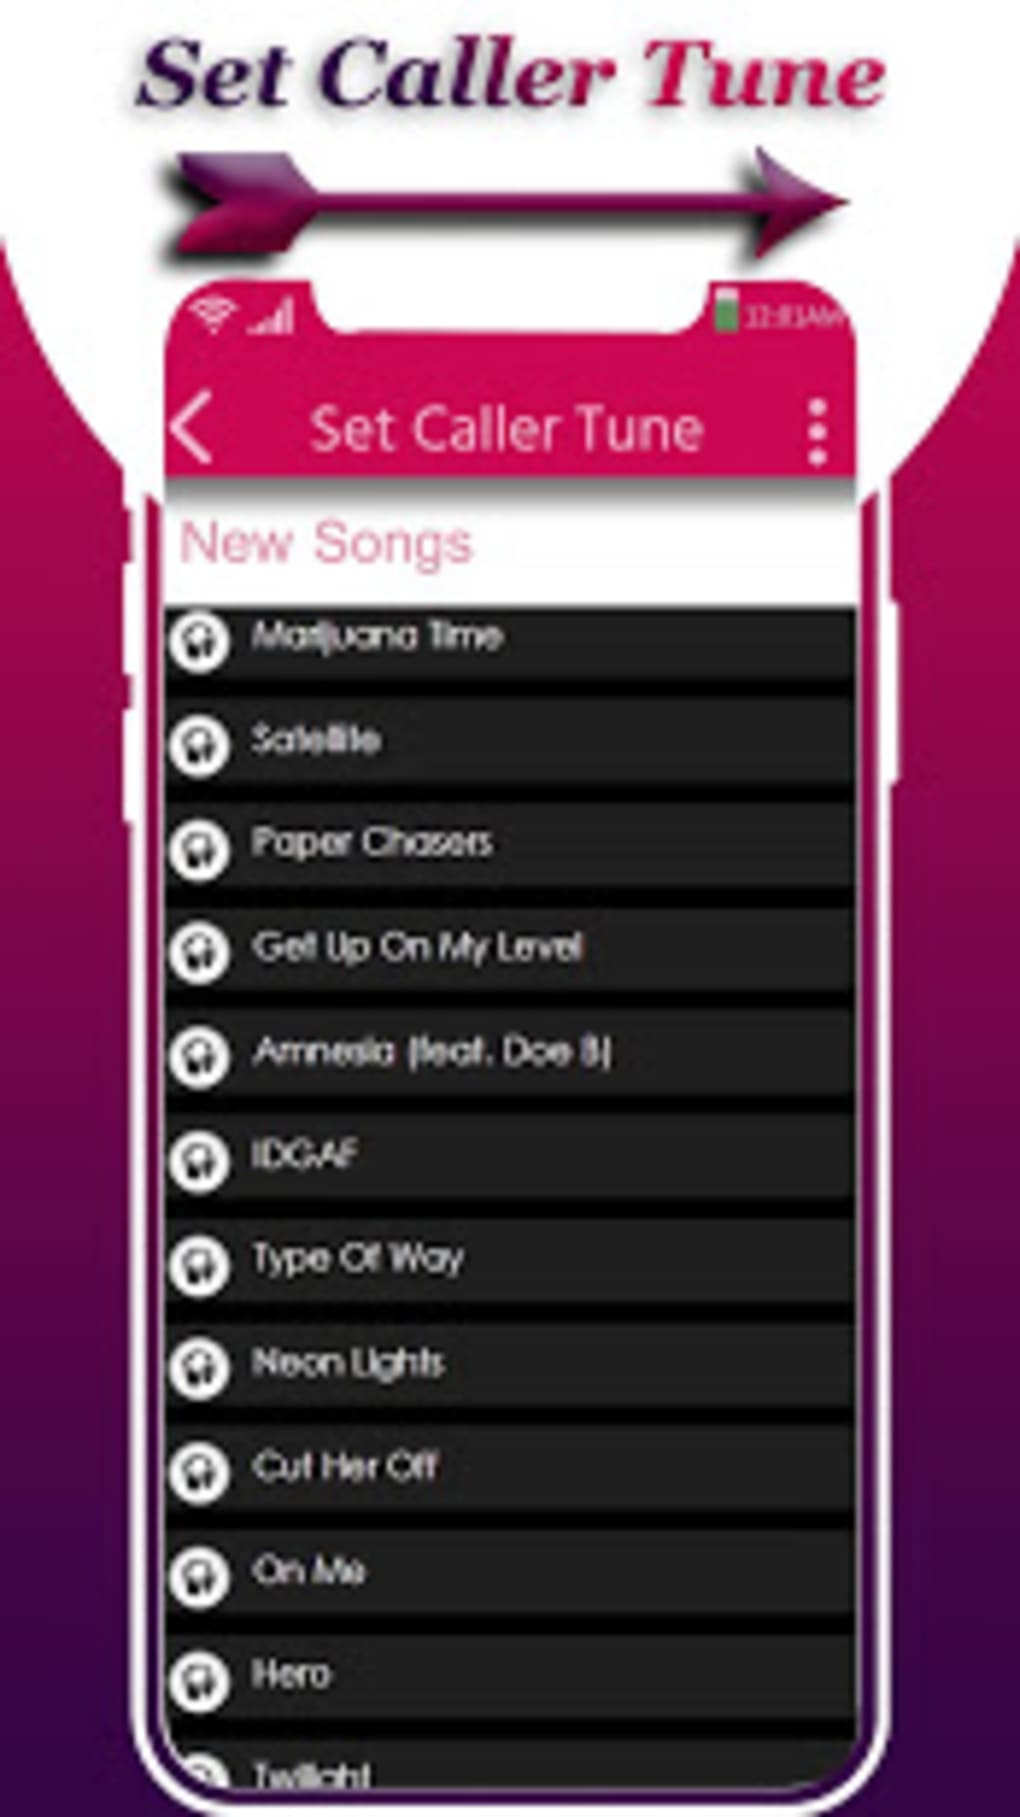 Set Caller Tune New Ringtone 2019 Apk For Android Download Super simple songs 3 music: set caller tune new ringtone 2019 apk